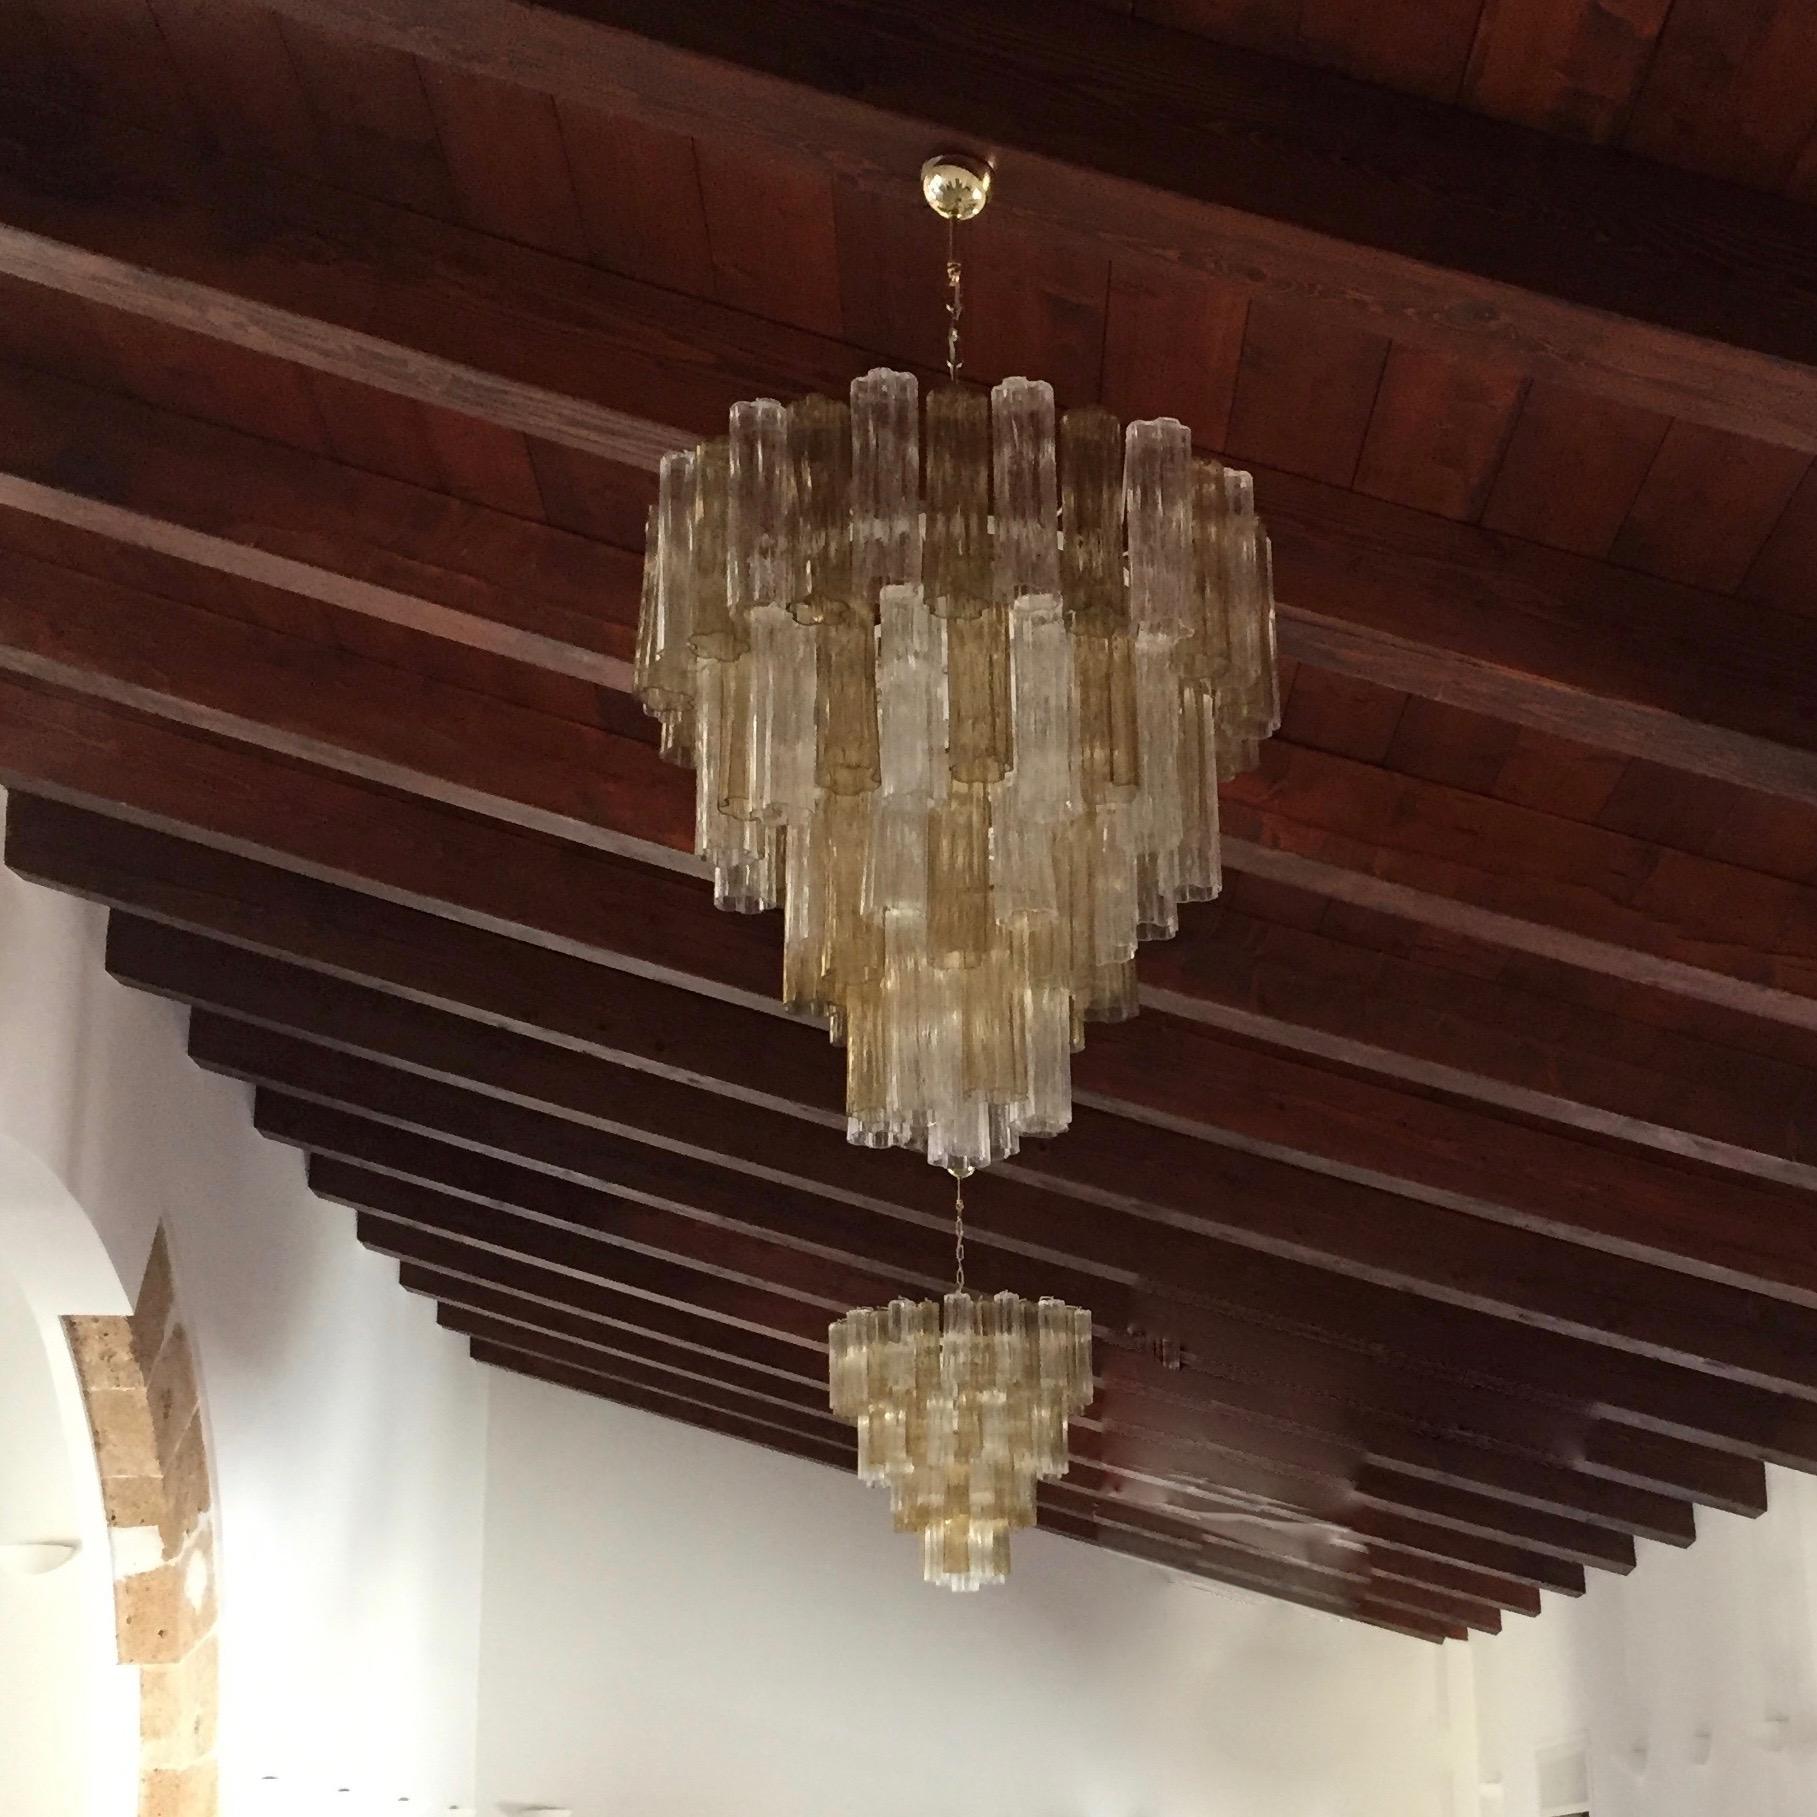 Midcentury design organic chandelier, entirely handcrafted in Italy, customizable in sizes, colors and finishes. The white lacquered metal structure supports large glass tubes called Tronchi, with star shape section, in blown Murano glass